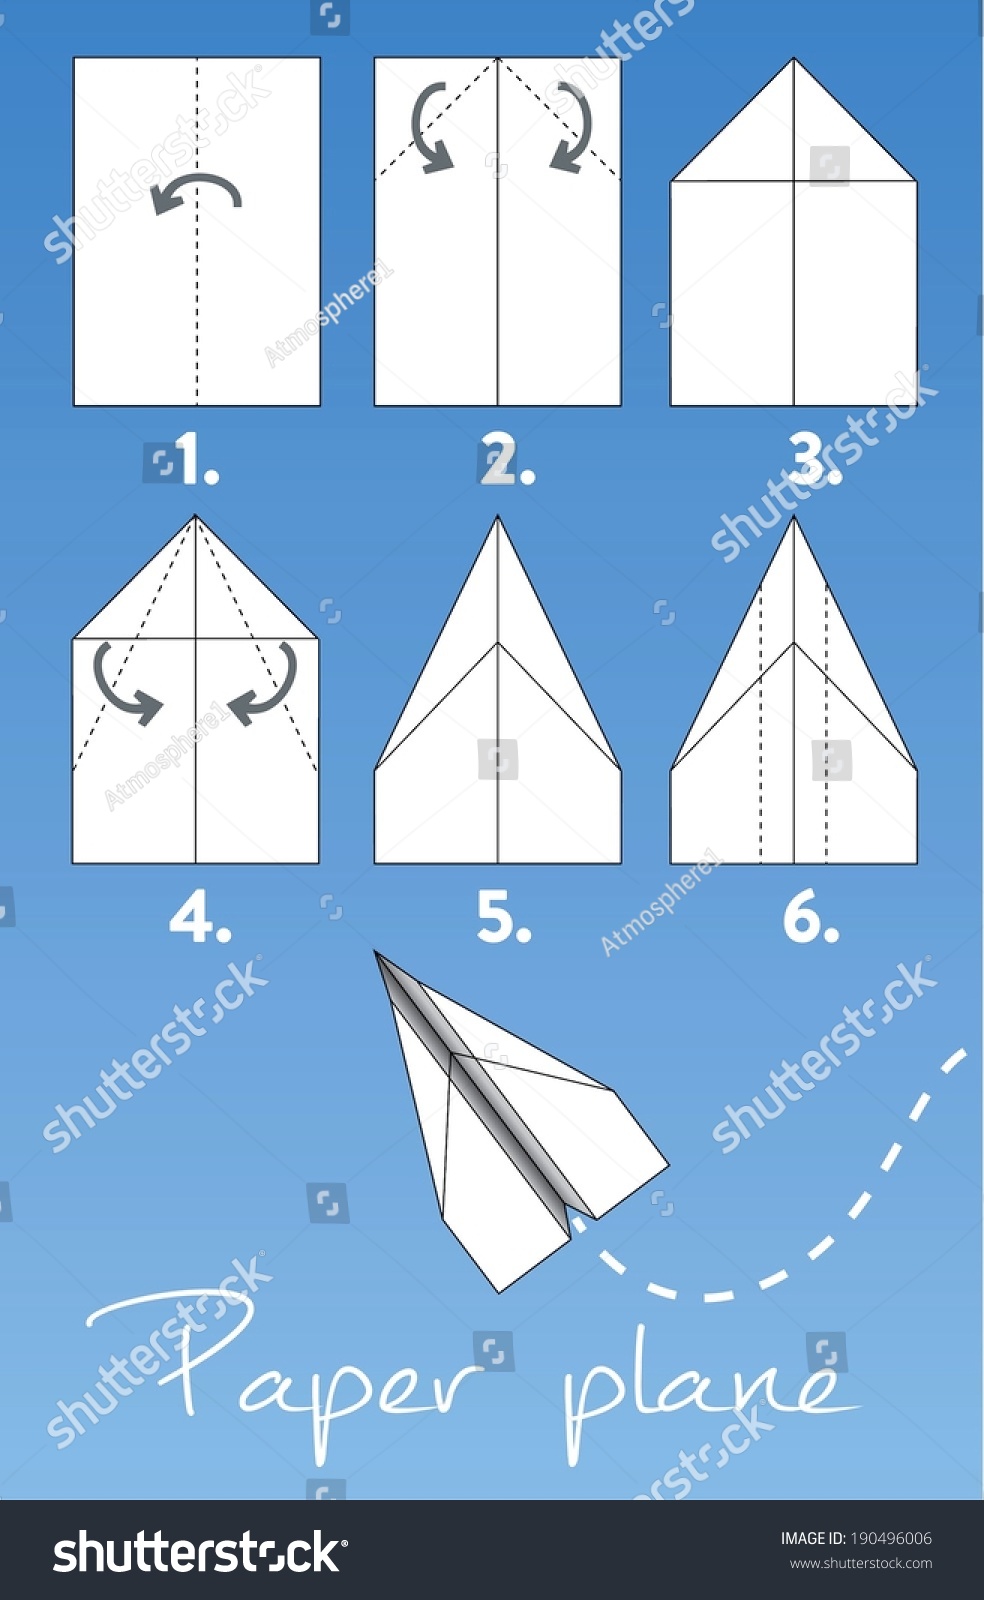 written-instructions-on-how-to-make-a-paper-airplane-sludgeport919-web-fc2